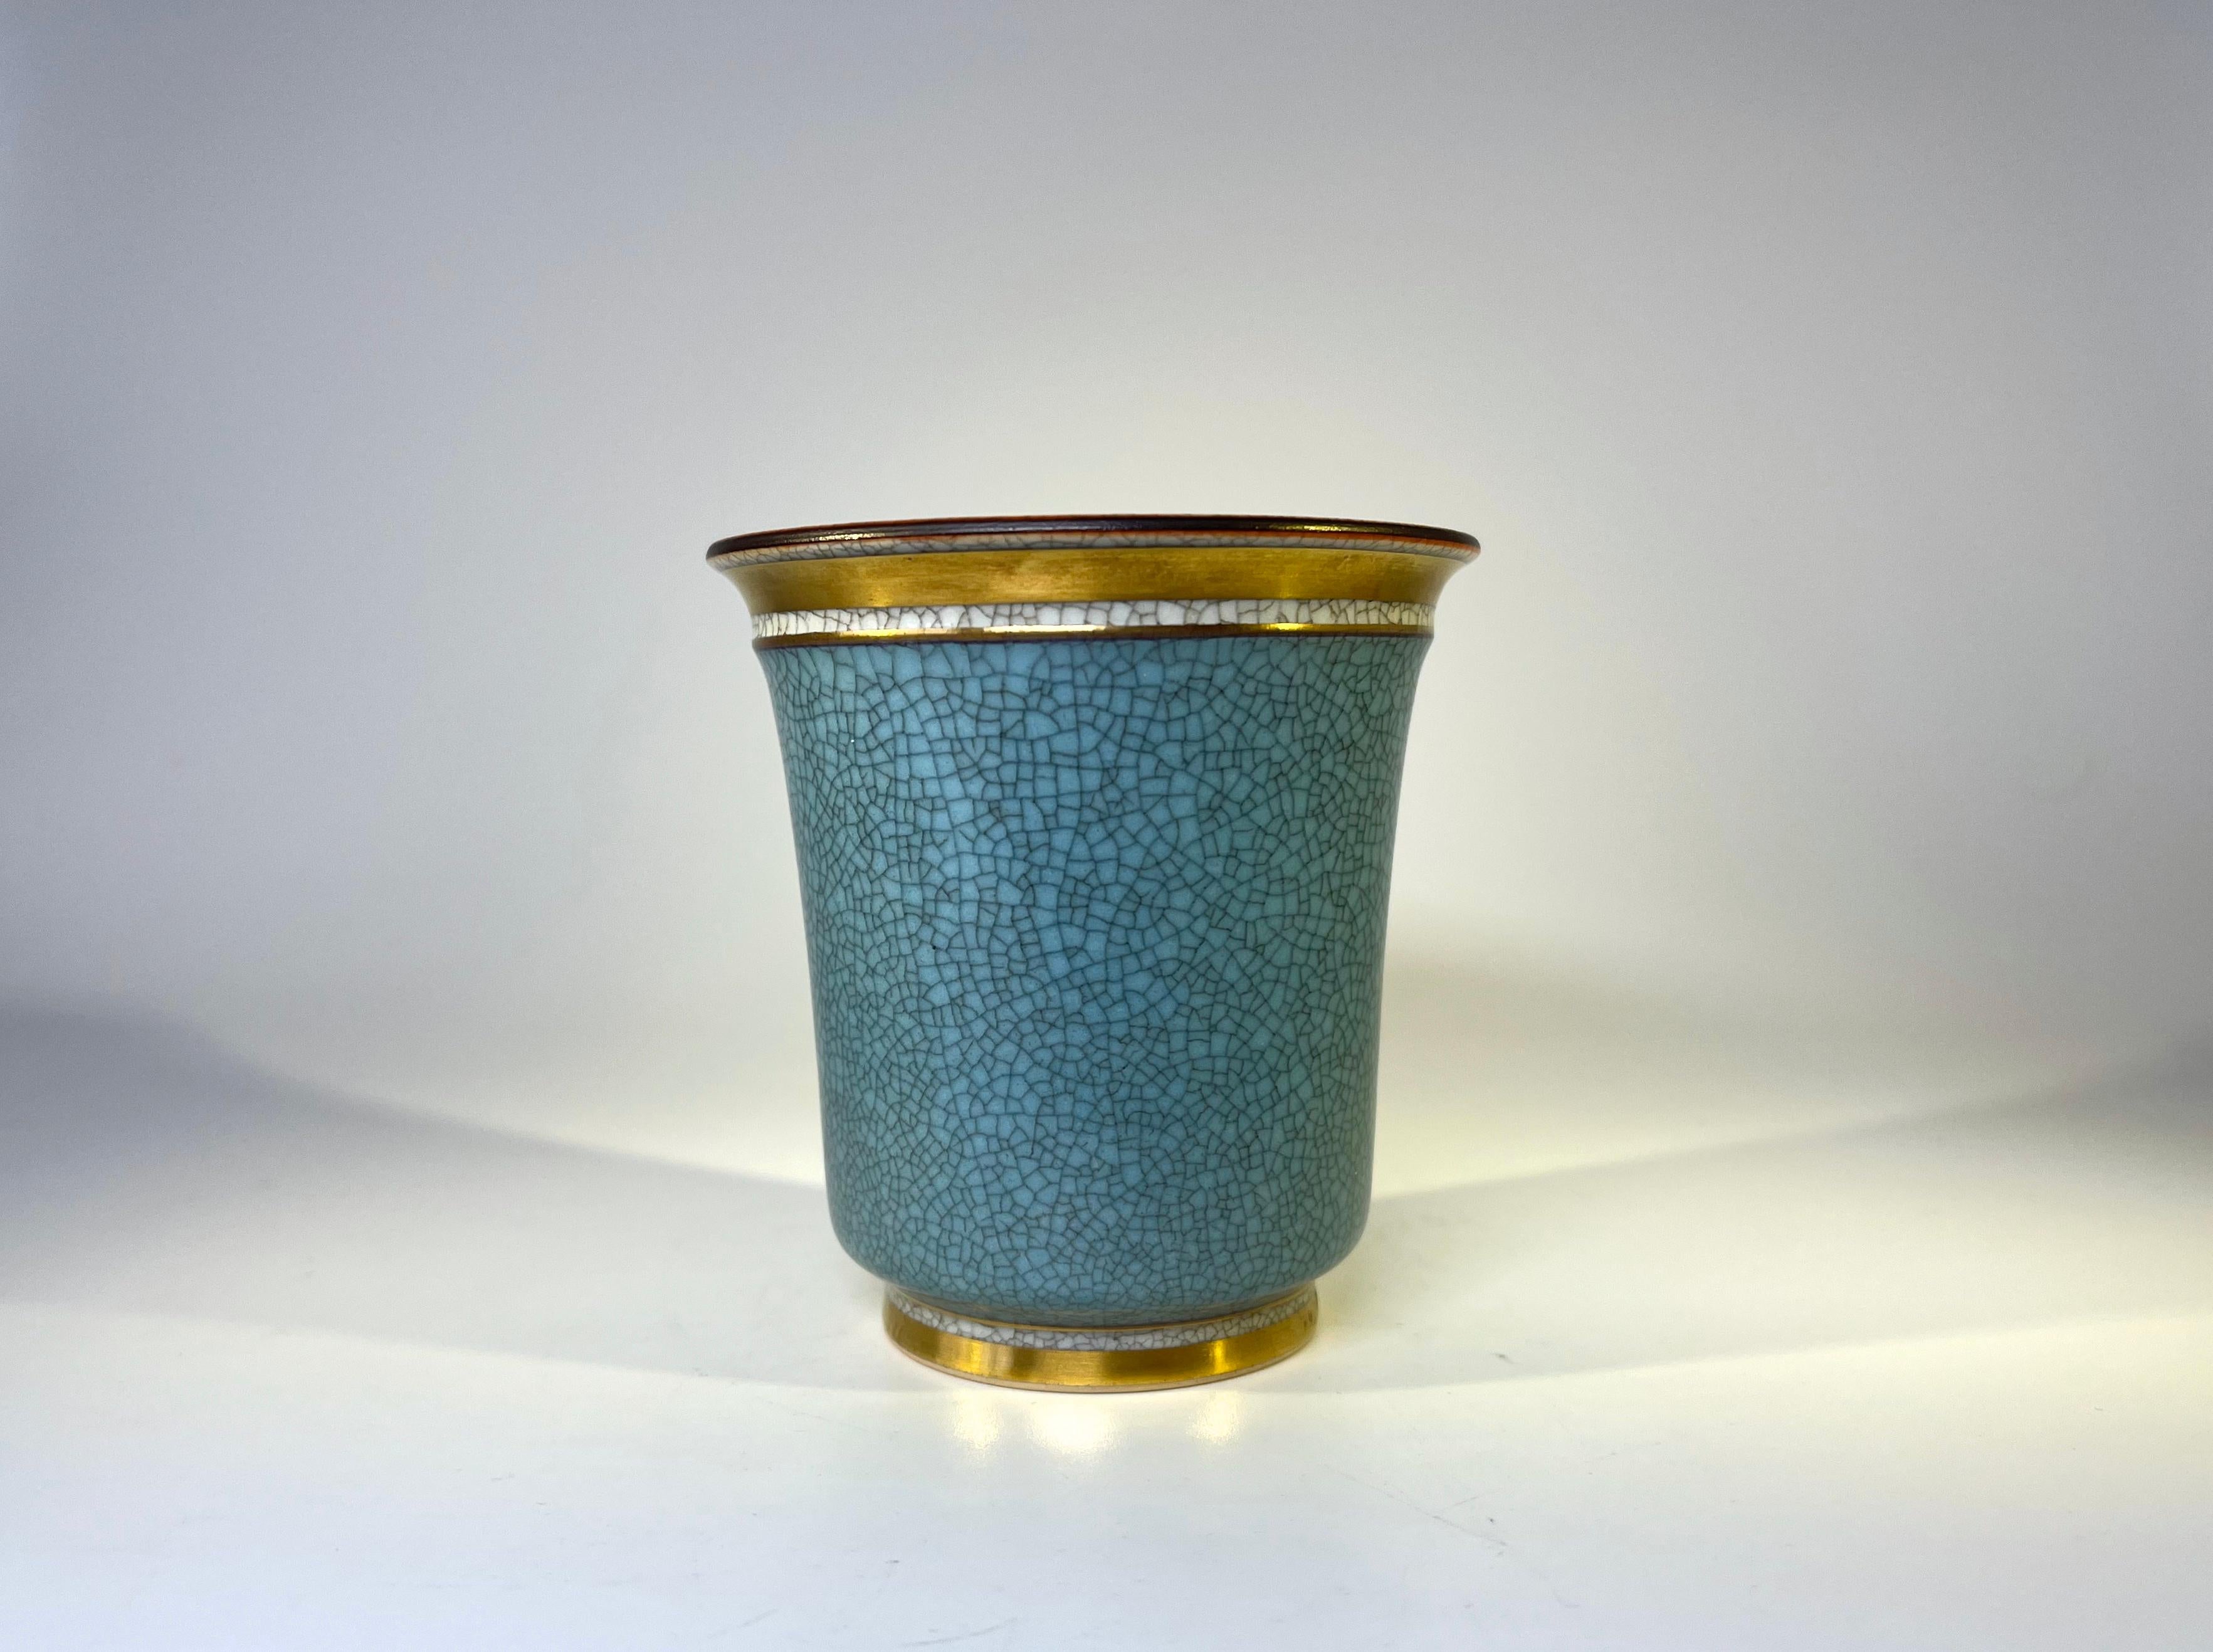 Thorkild Olsen for Royal Copenhagen, Denmark, porcelain crackle glaze tumbler pot
Turquoise crackle glaze with gilded bands. Pale grey crackle interior
Circa 1963
Stamped and numbered 3491
Height 3.5 inch, Diameter 3 inch
In very good condition.